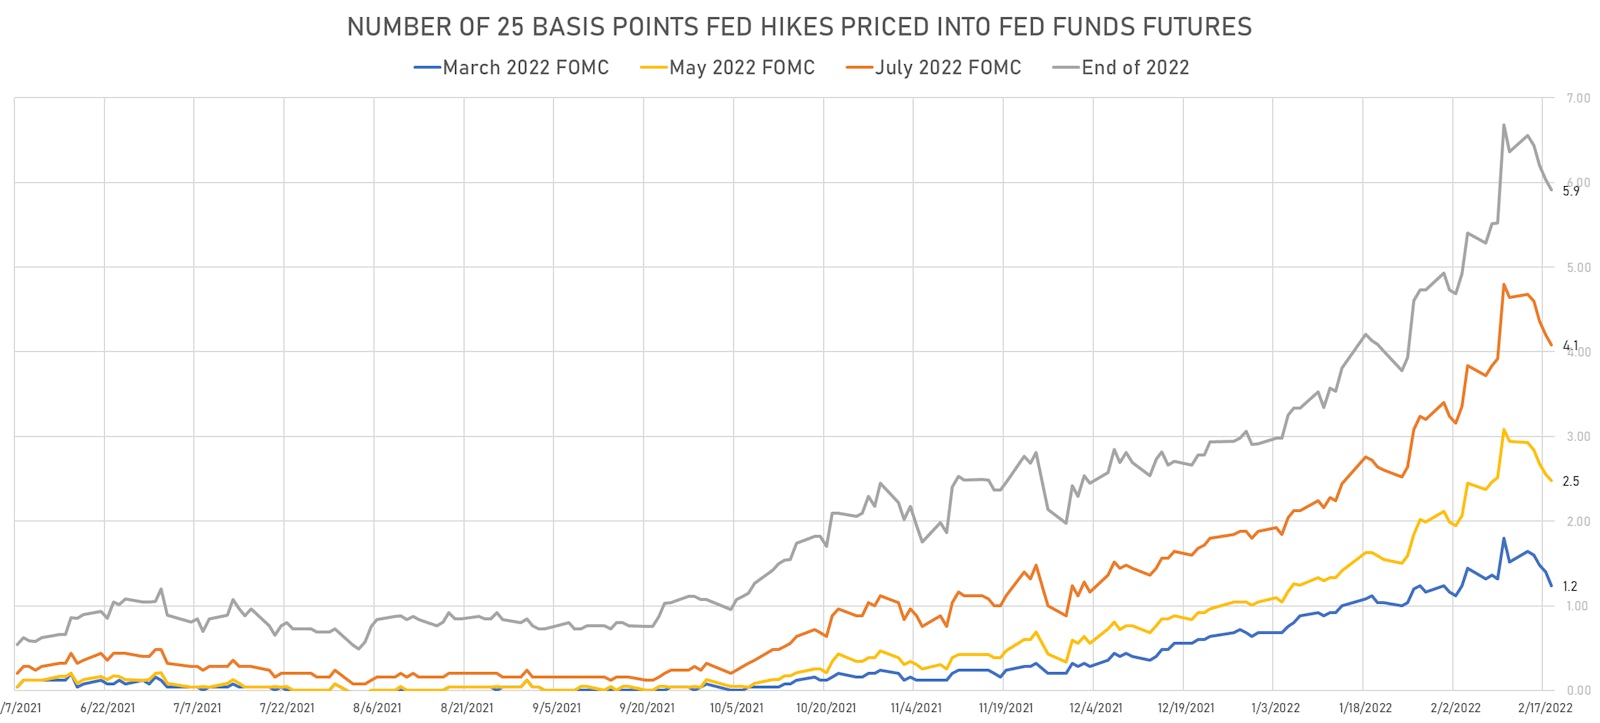 Rate Hikes In 2022, Implied From Fed Funds Futures | Sources: ϕpost, Refinitiv data